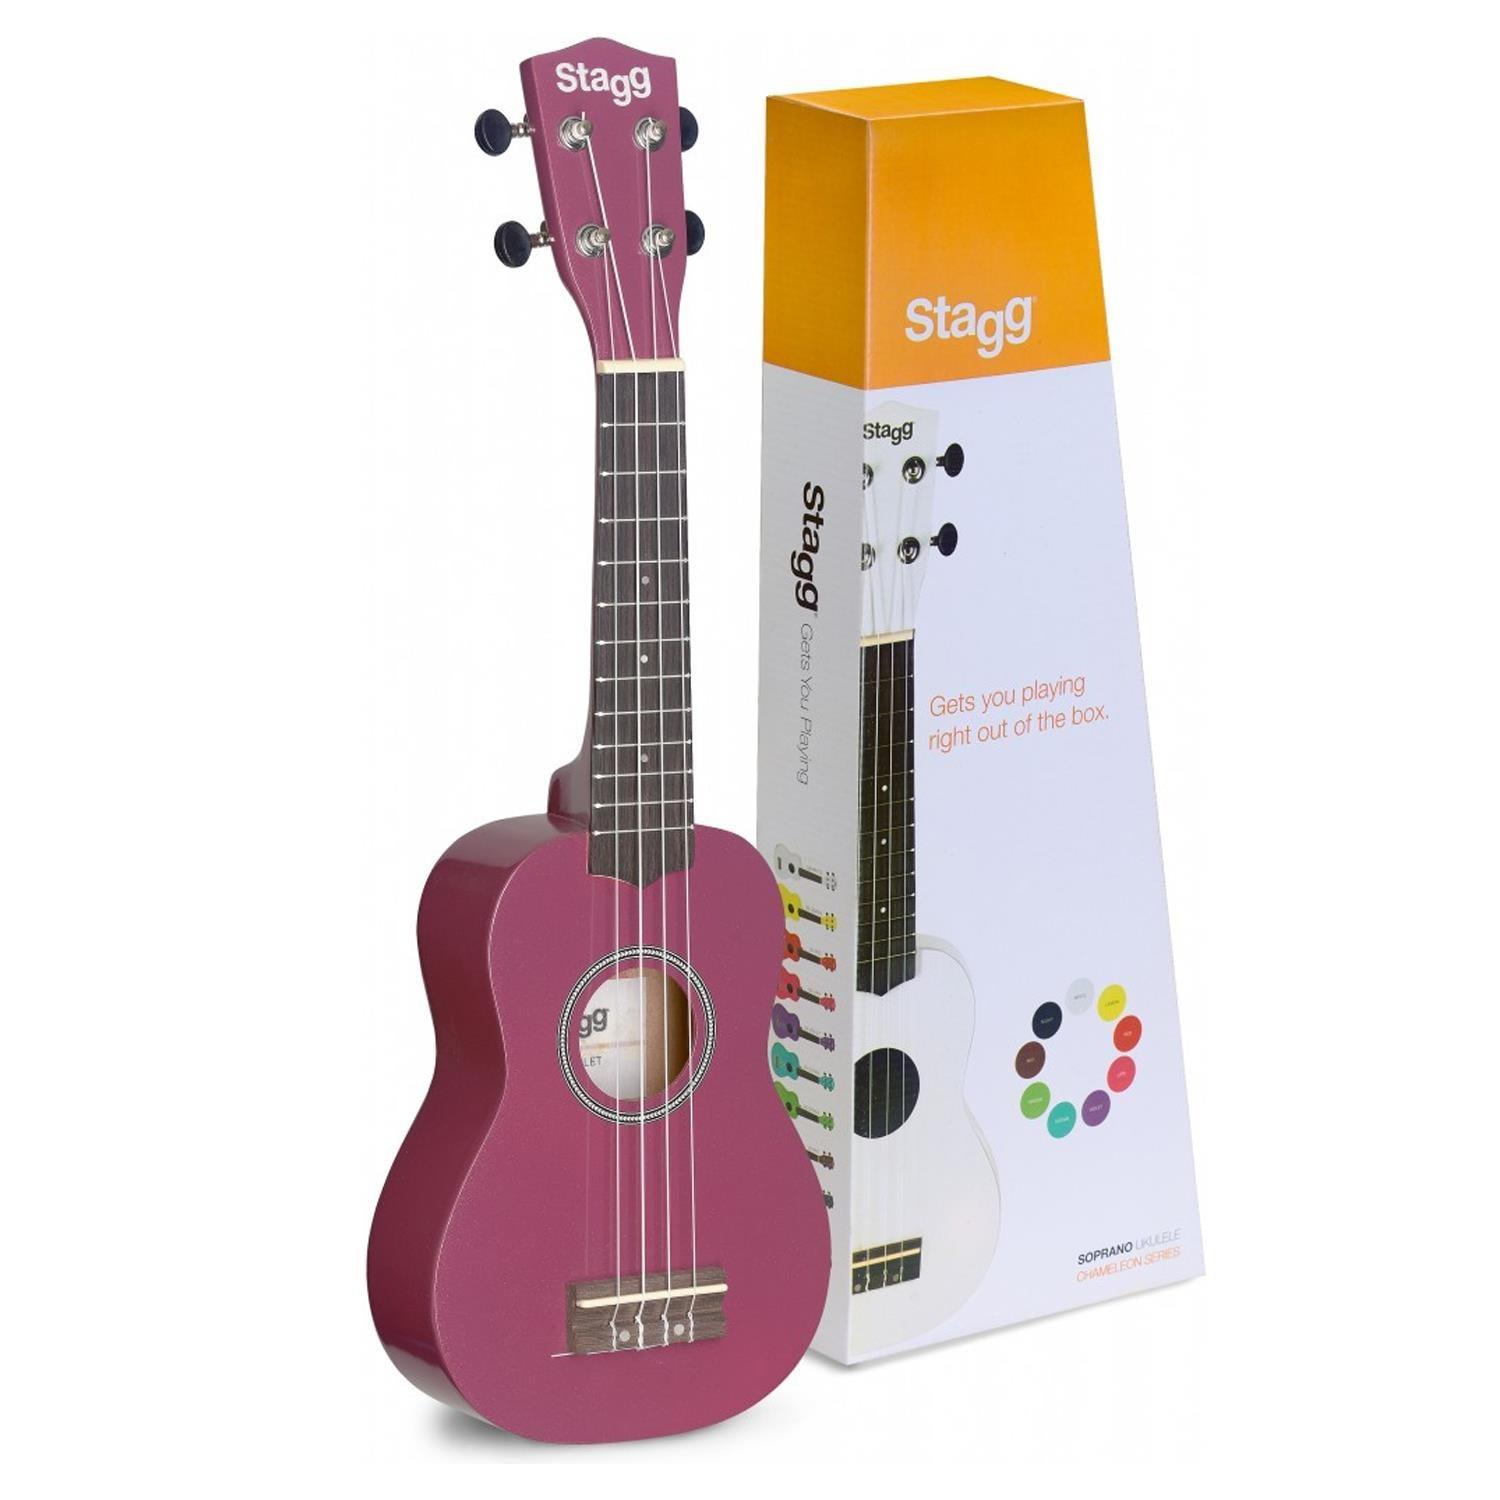 Stagg US-Violet Purple Soprano Ukulele With Bag - DY Pro Audio